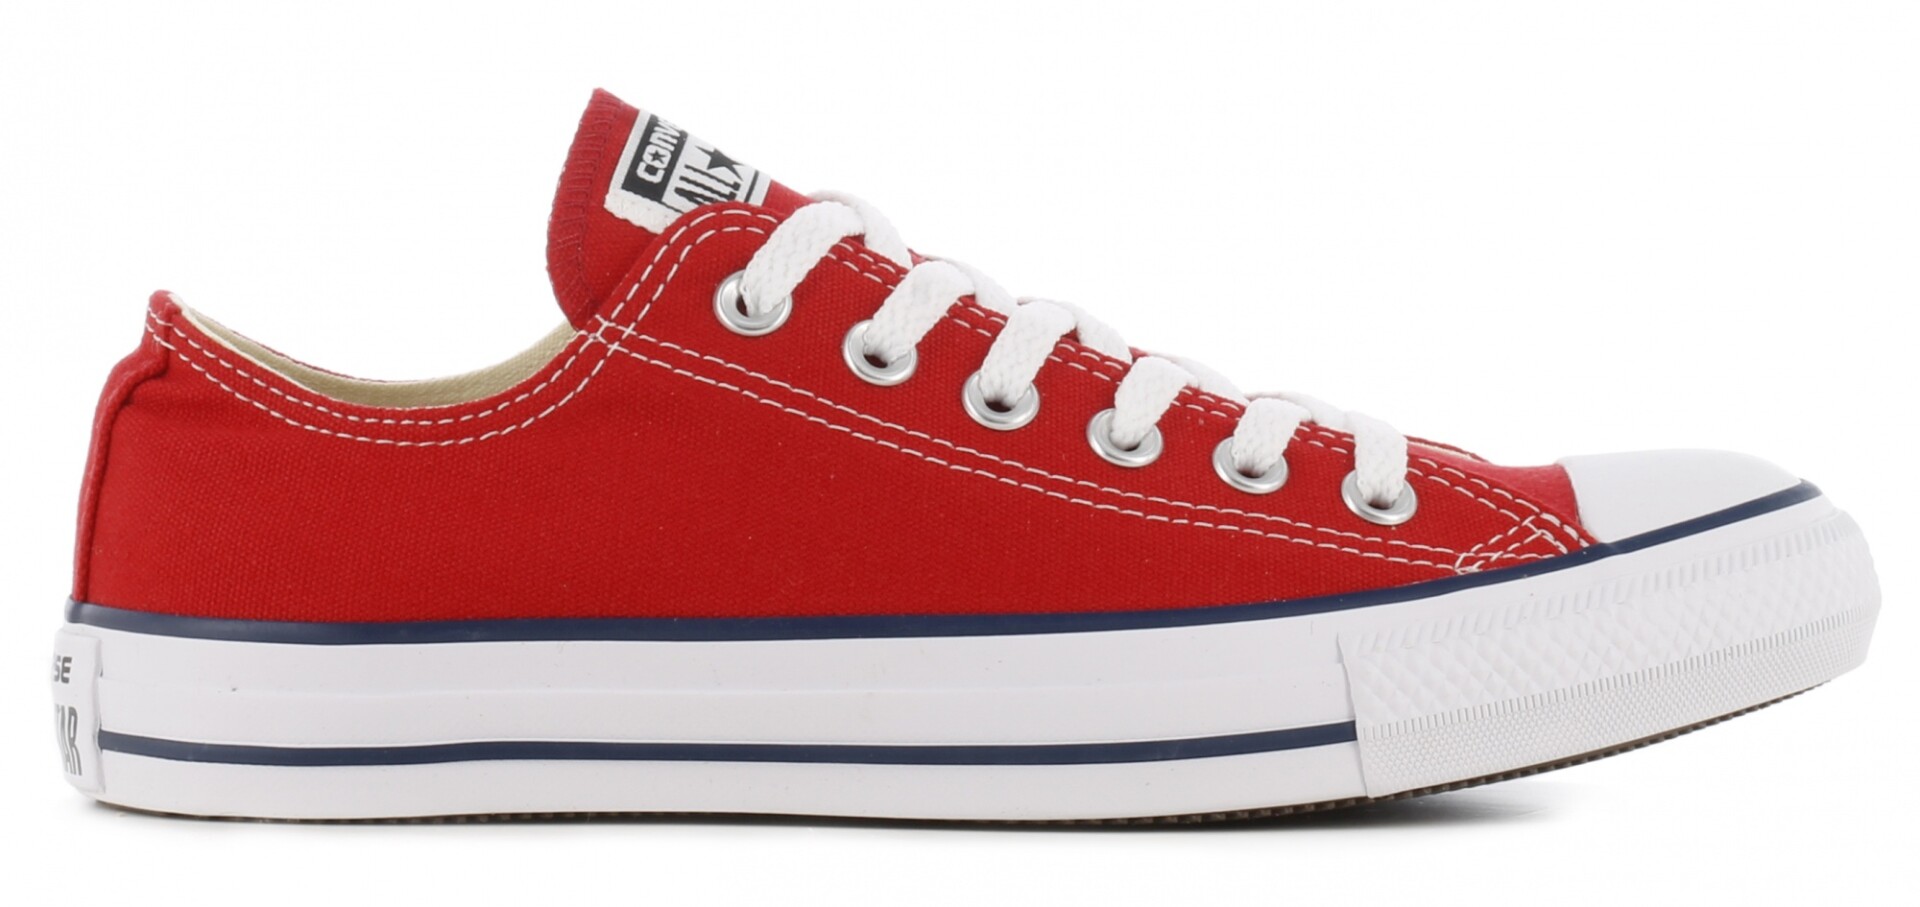 Classic - Basket Low Converse - Red 